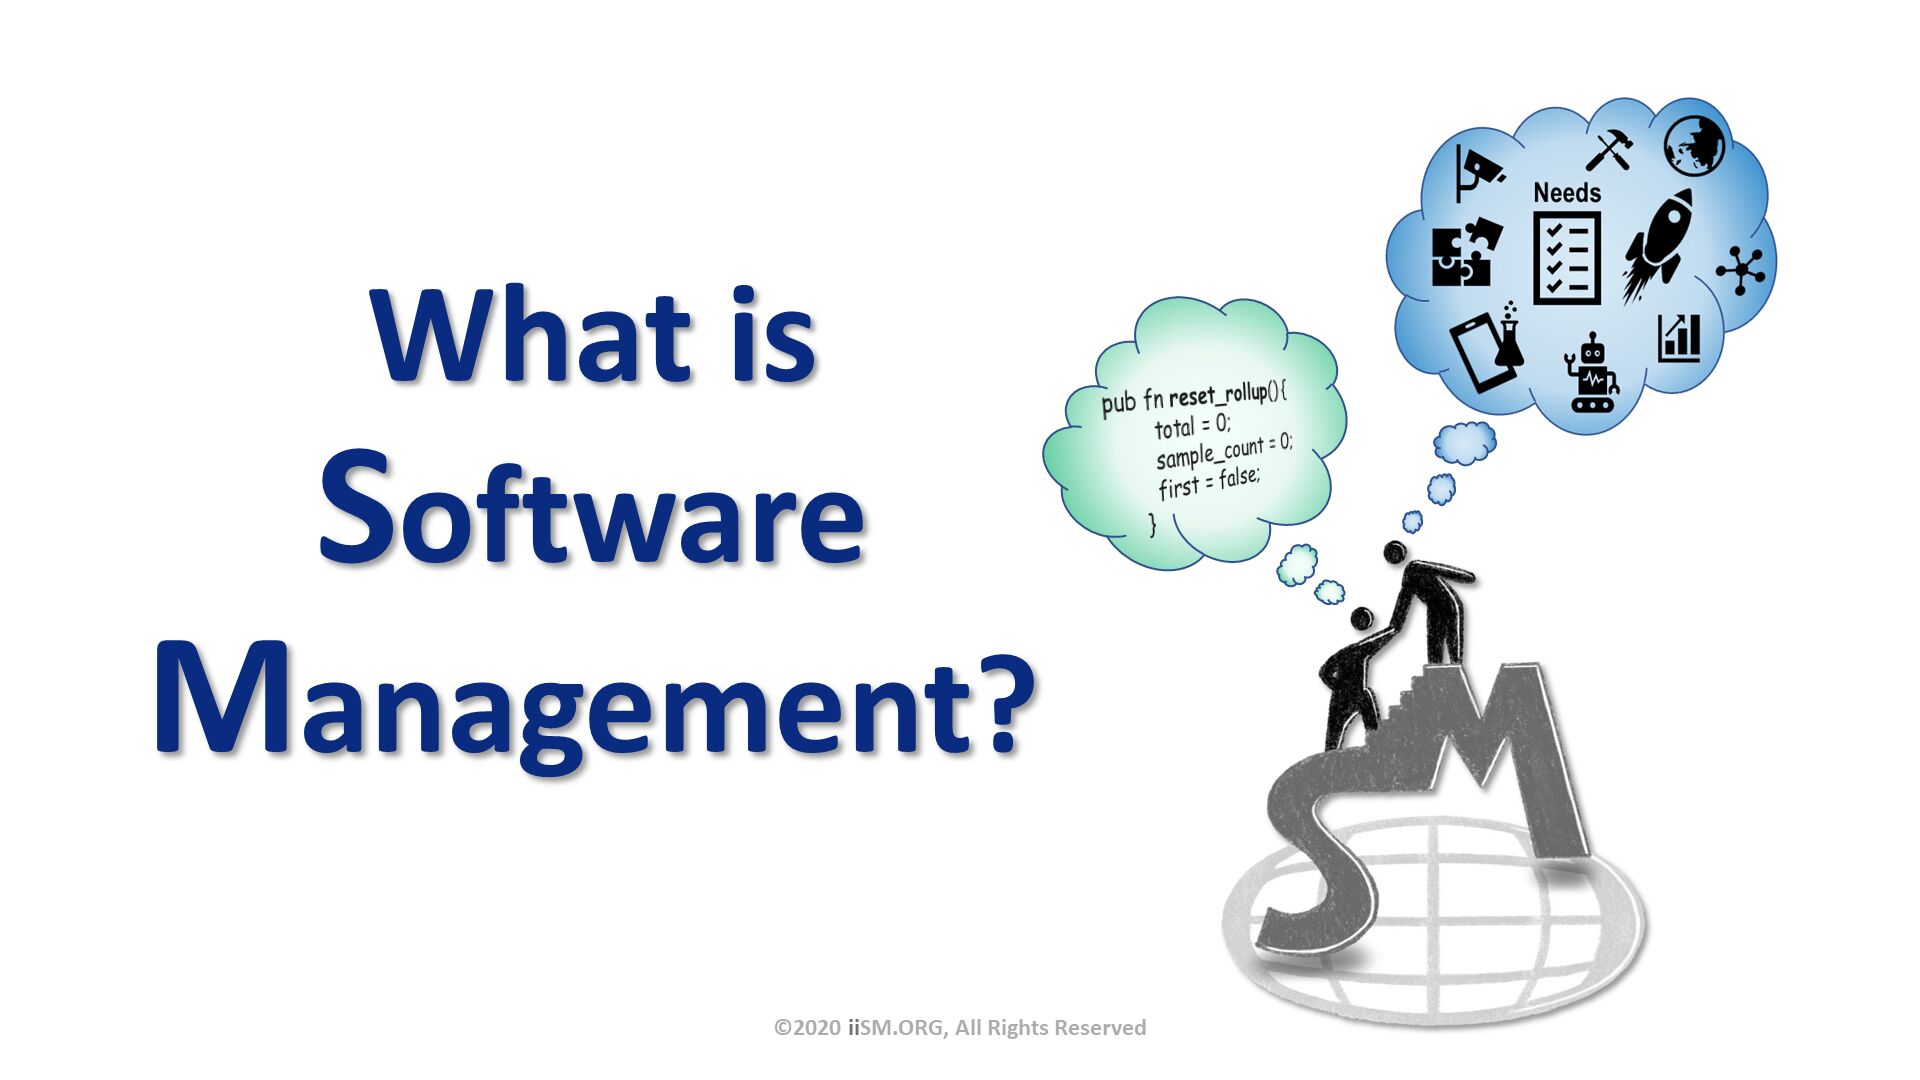 ©2020 iiSM.ORG, All Rights Reserved. What is 
Software Management?. 